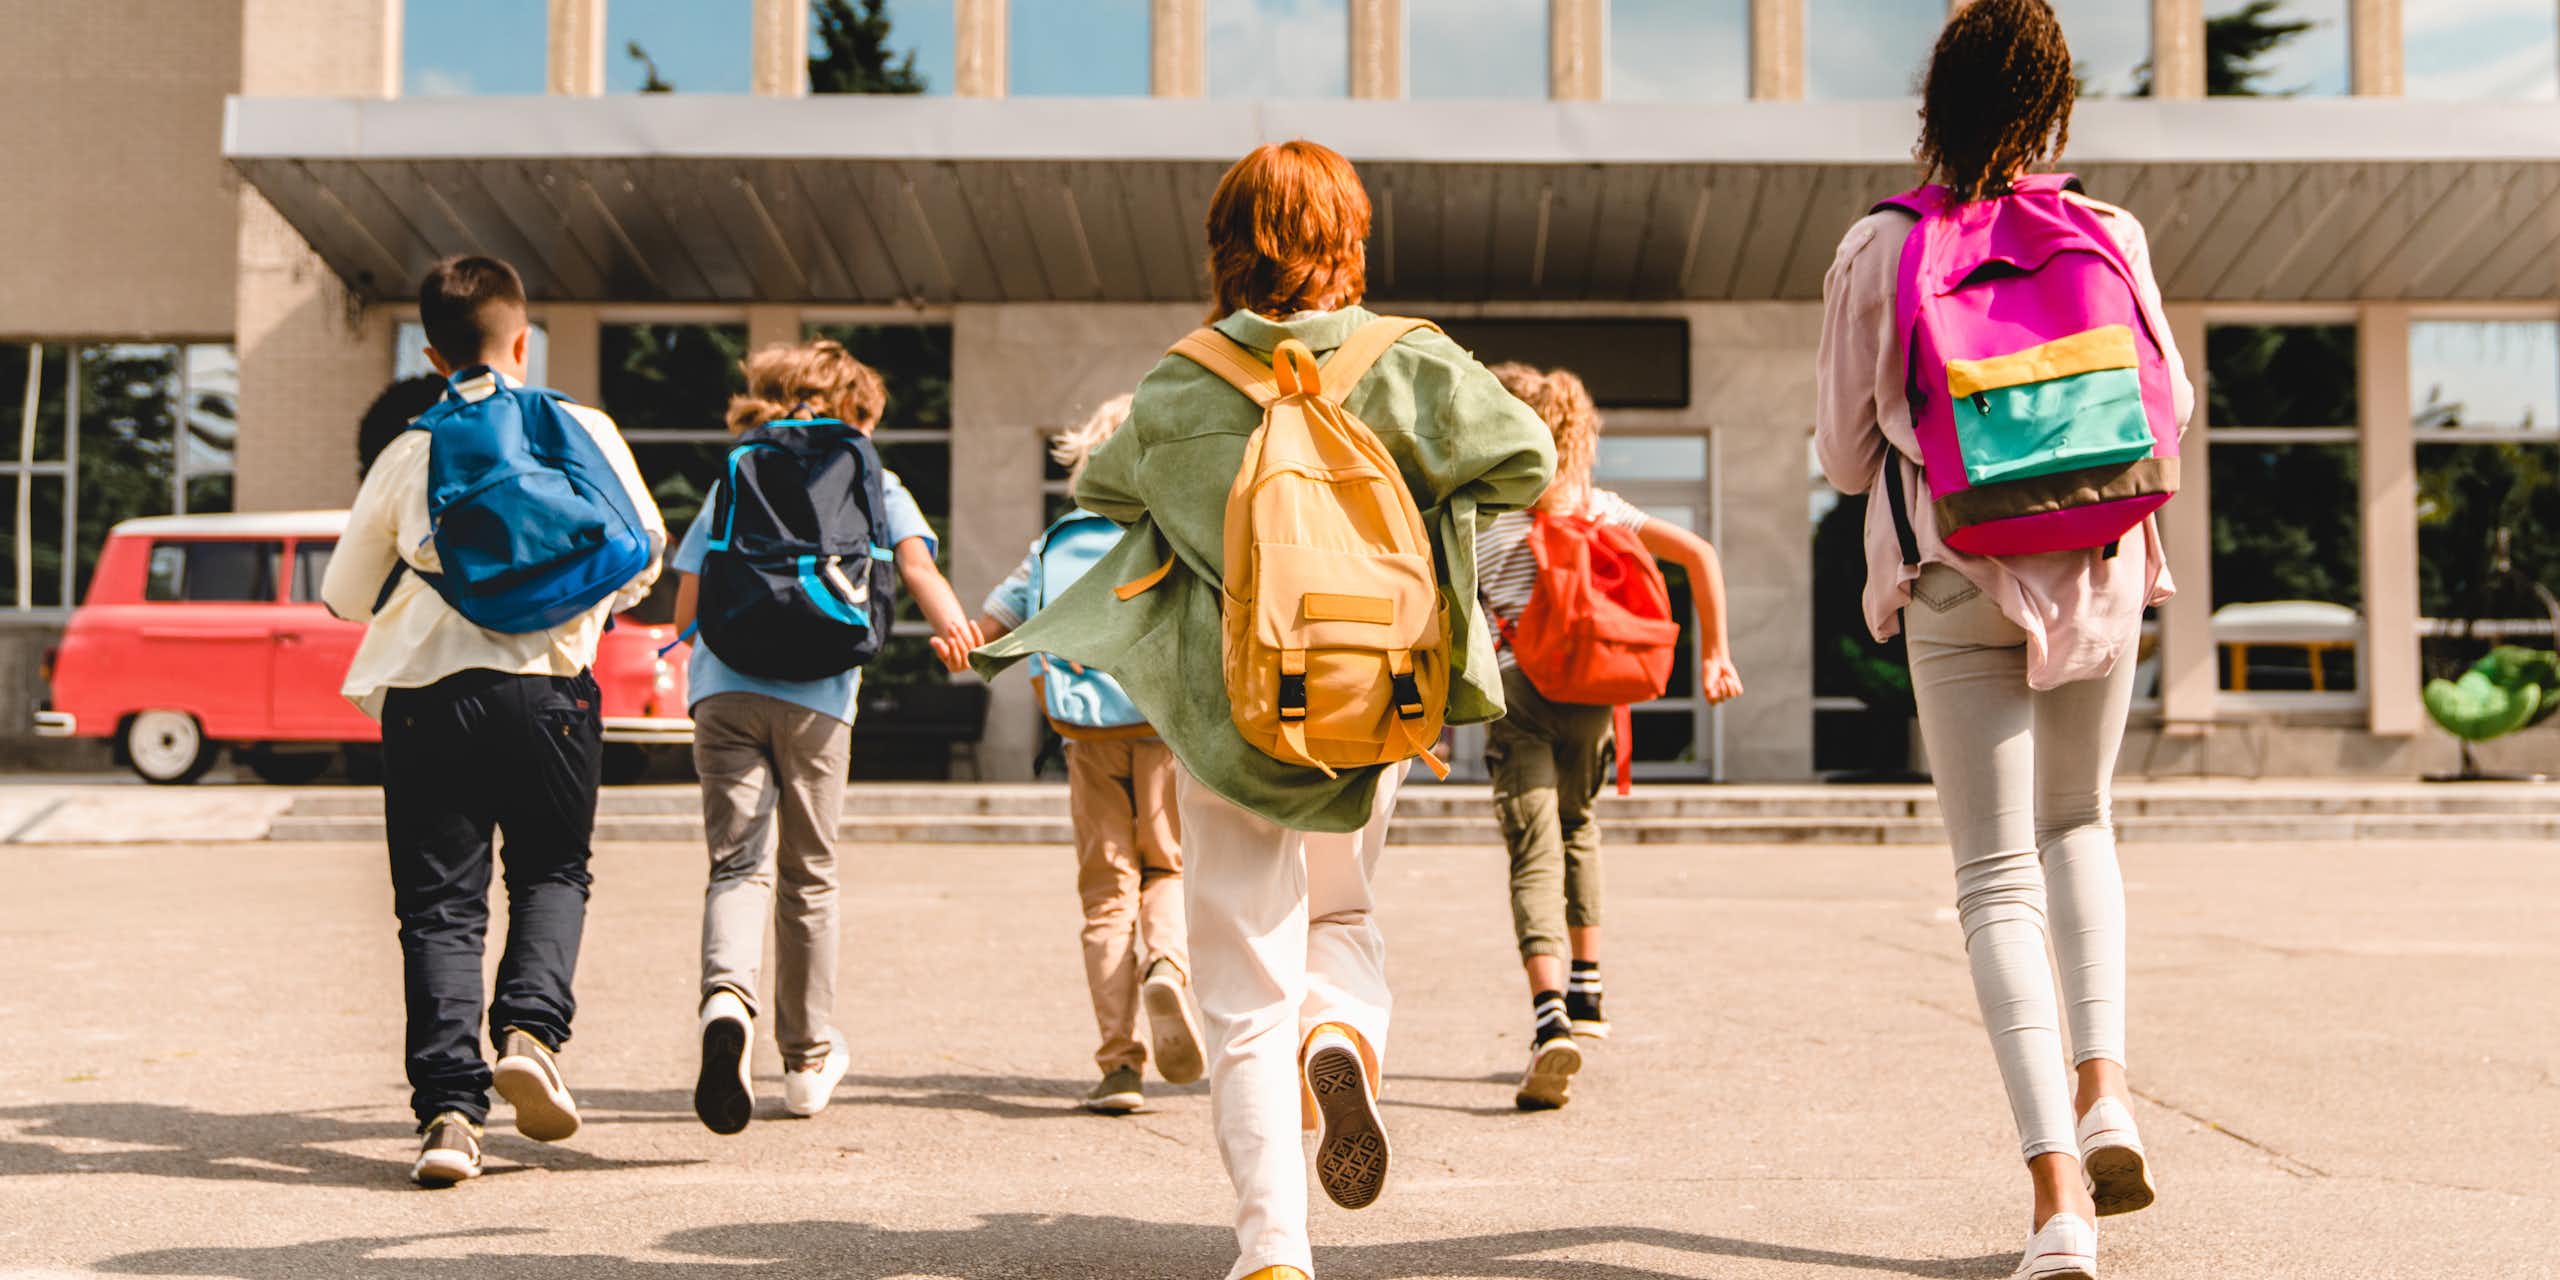 View from behind of six young students dressed in colourful clothing and backpacks, running into a school building